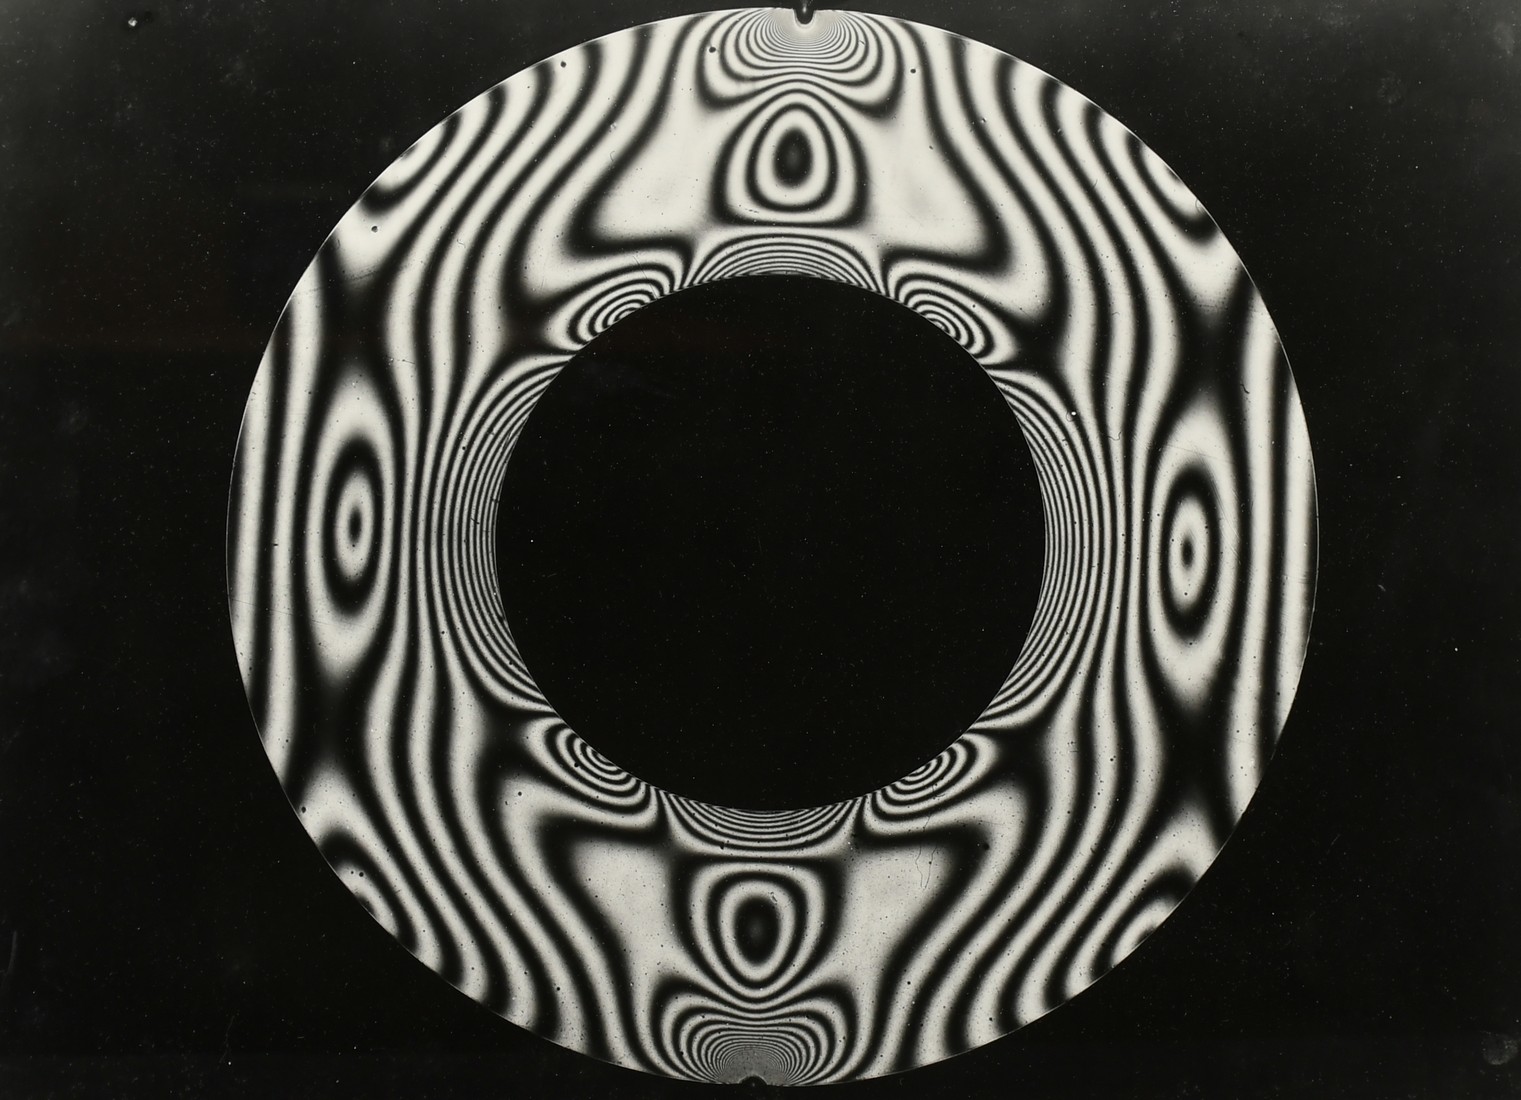 Circa 1960's, a collection of three black and white photos of psychedelic subjects, each around